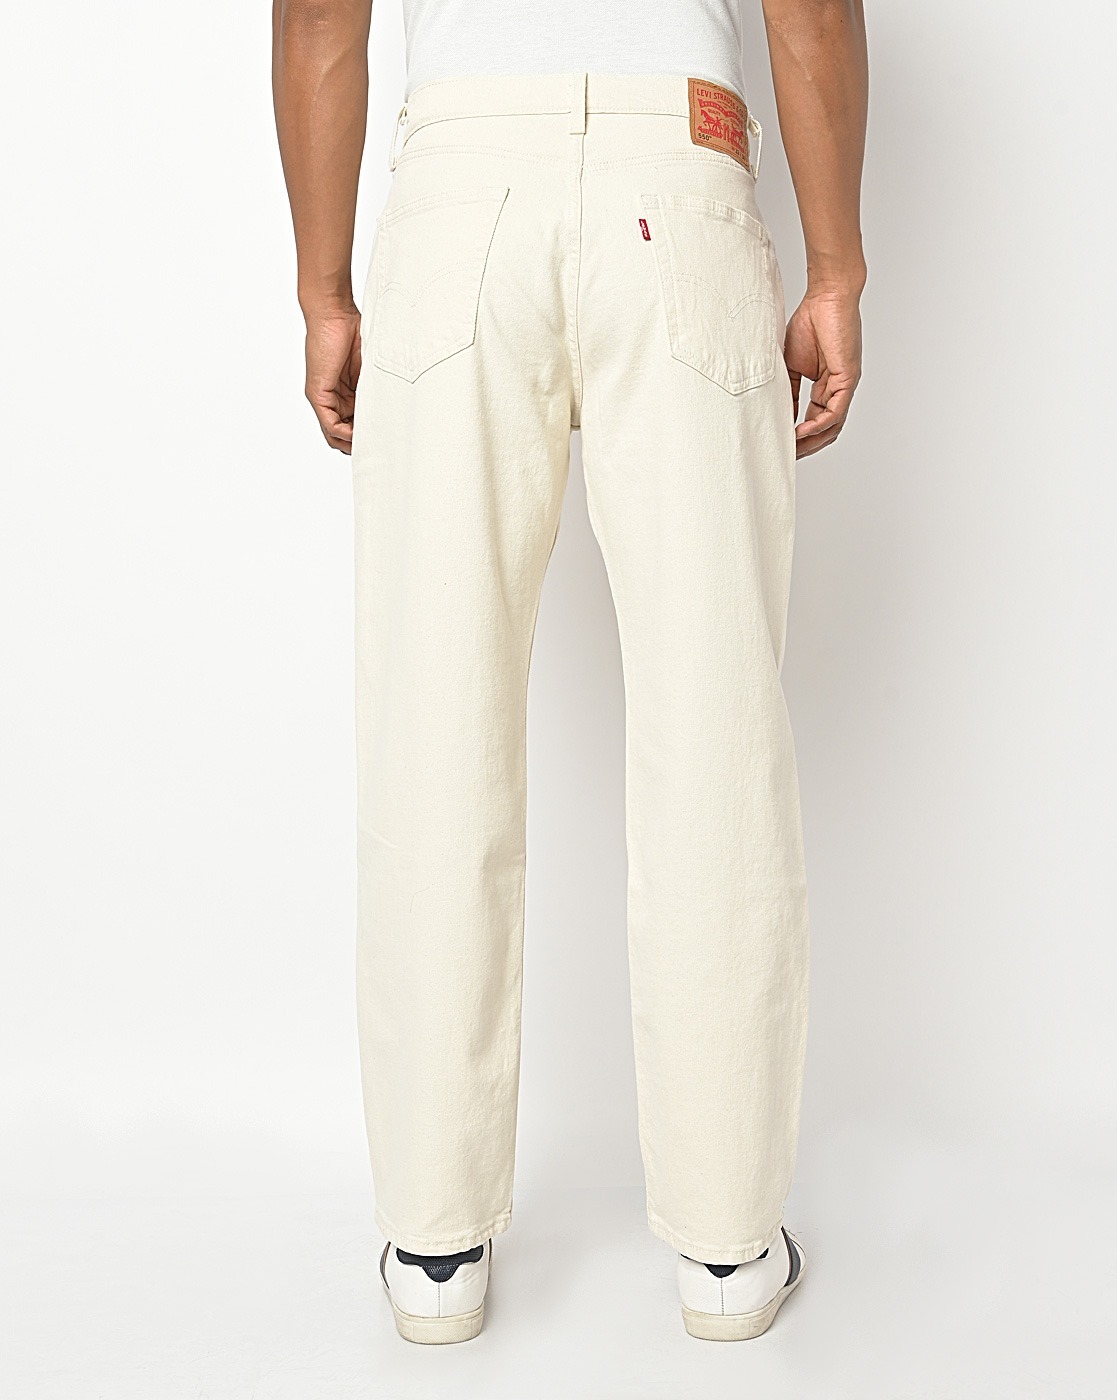 Buy Cream Trousers & Pants for Men by LEVIS Online 